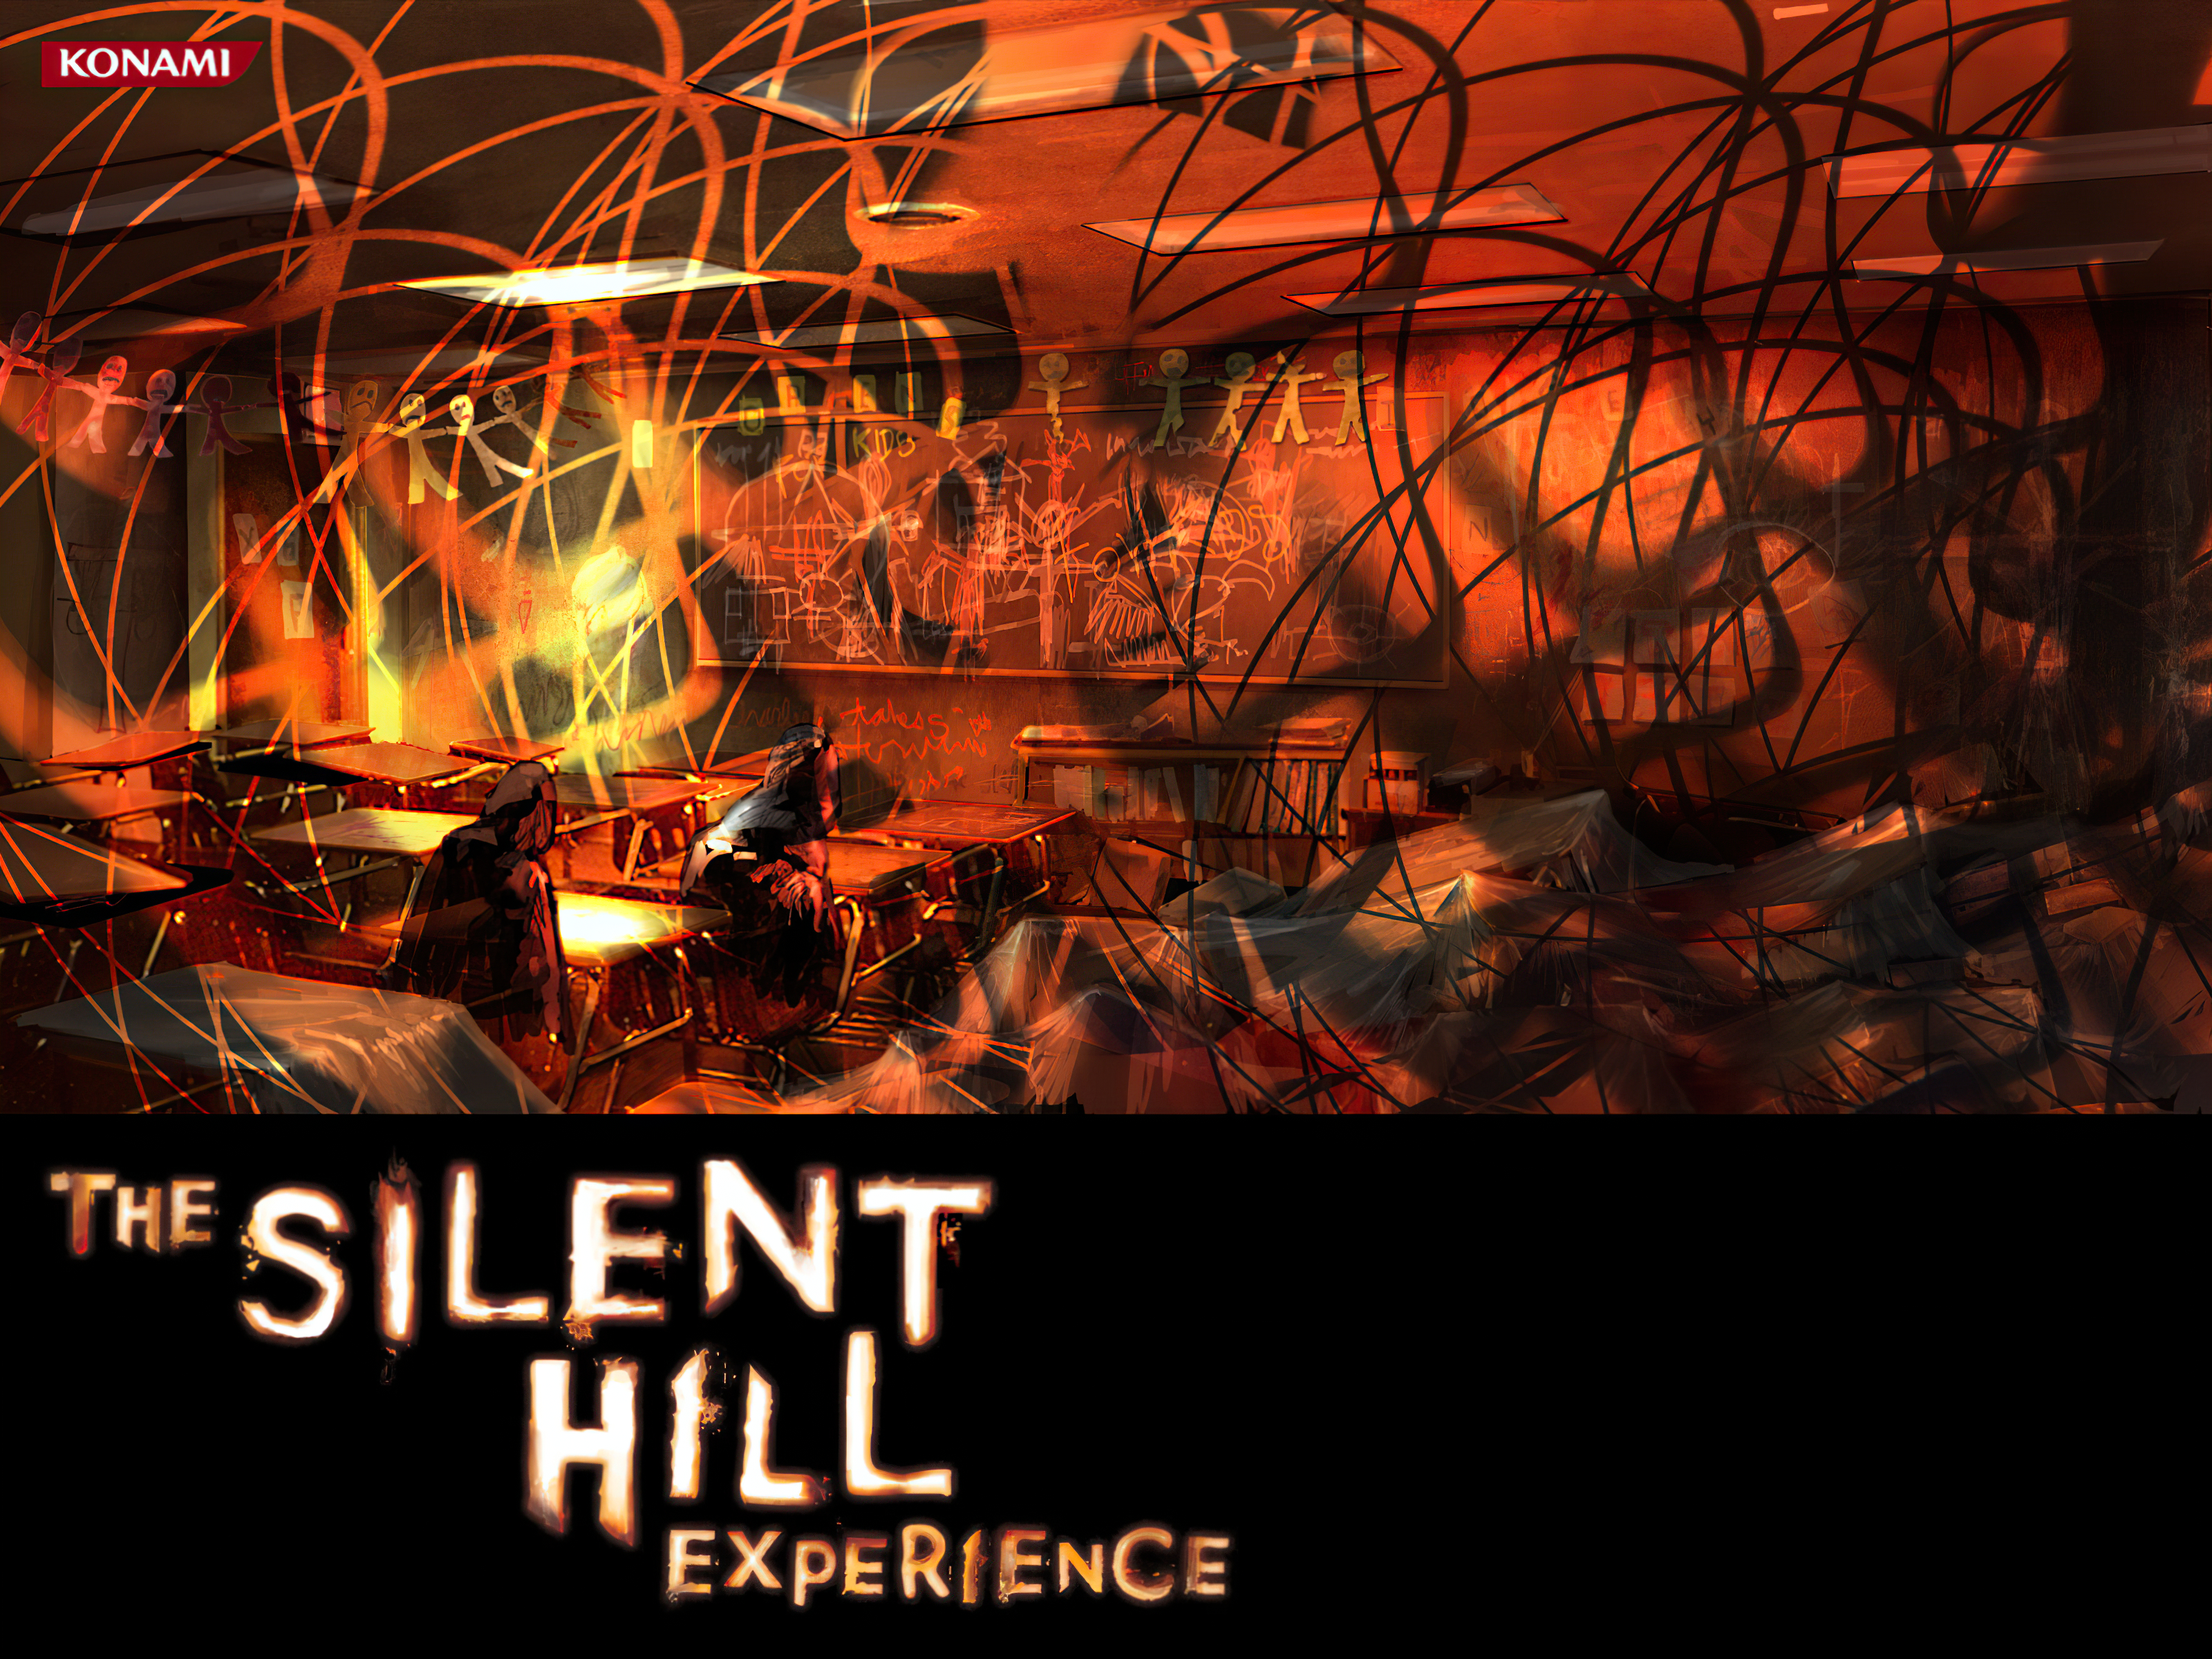 The Silent Hill Experience desktop wallpaper: a haunting portrayal of the iconic video game.